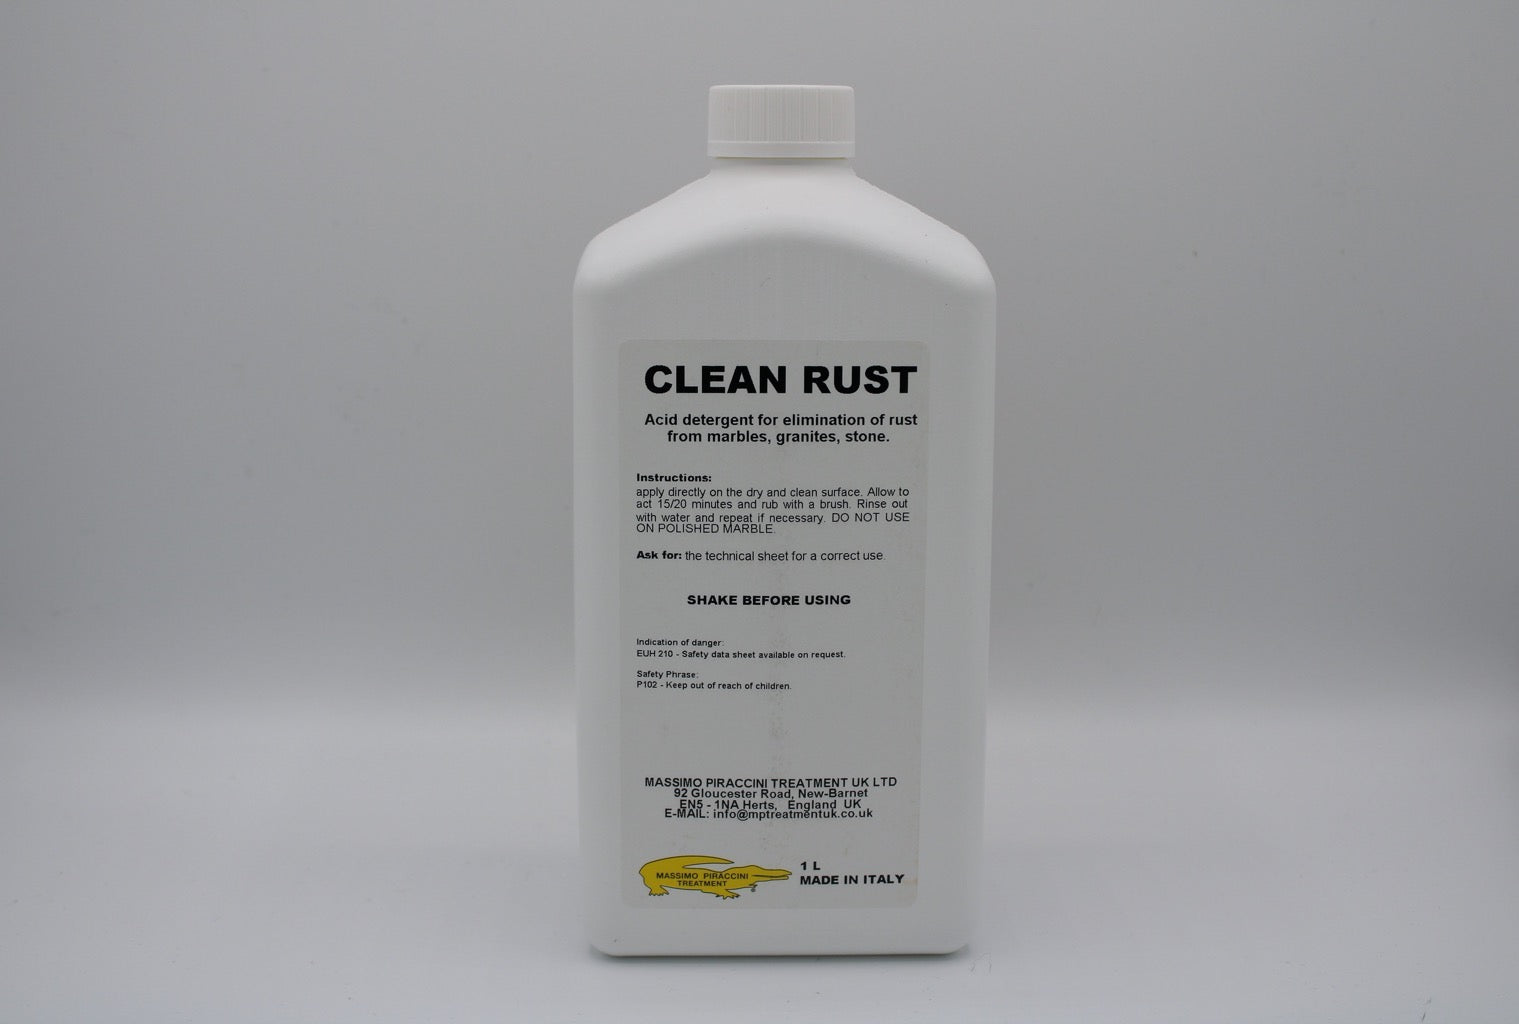 CLEAN RUST - Cleaner for rust